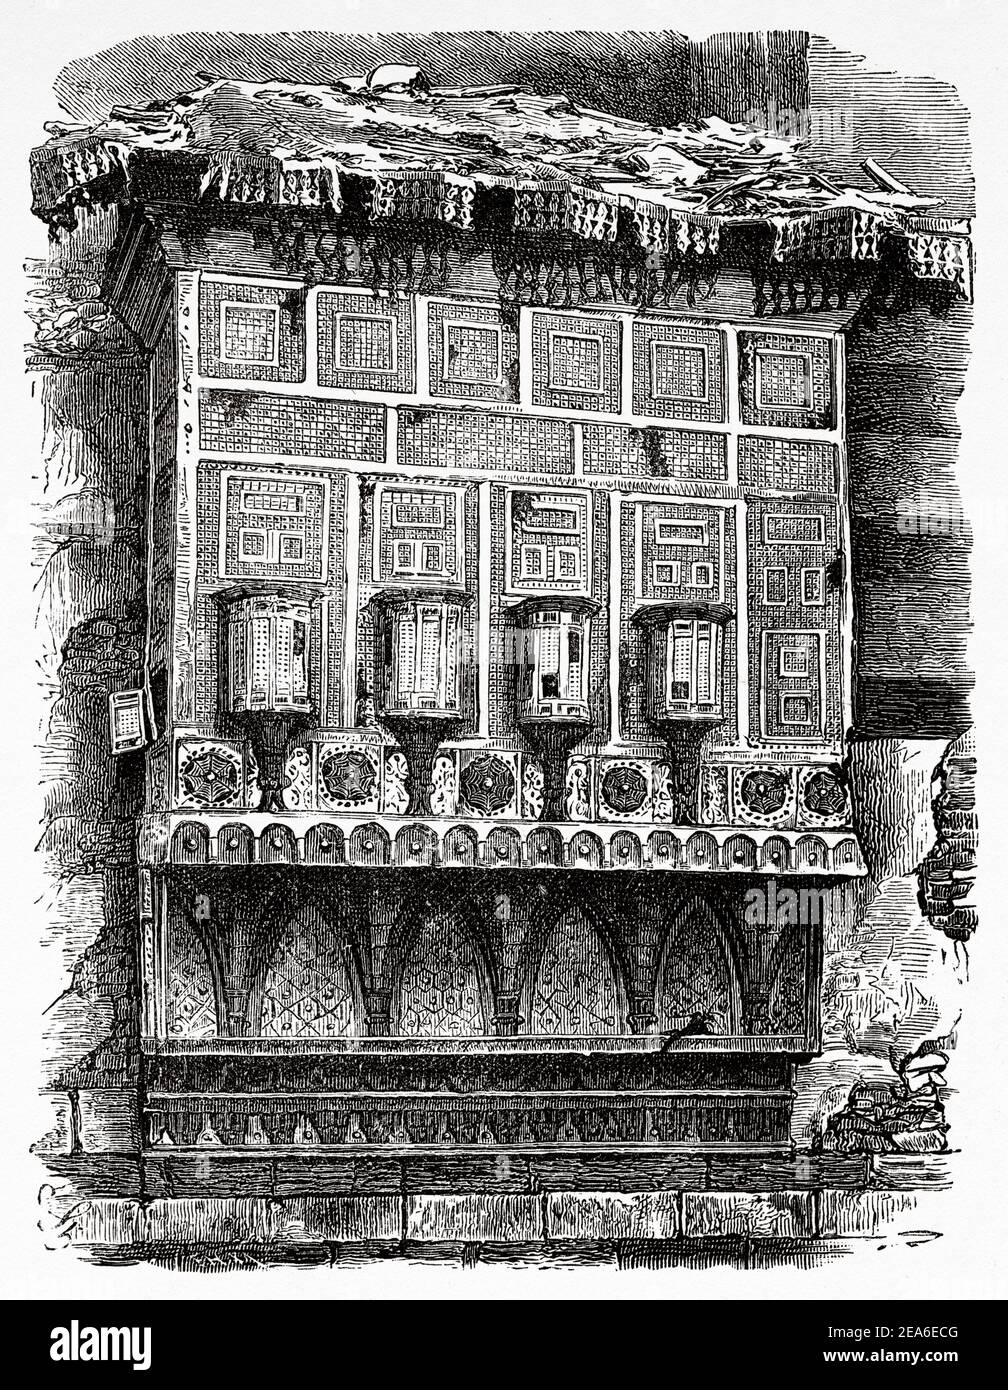 Windows of an old palace in the historic center of Cairo city, Ancient Egypt History. Old 19th century engraved illustration from El Mundo Ilustrado 1879 Stock Photo